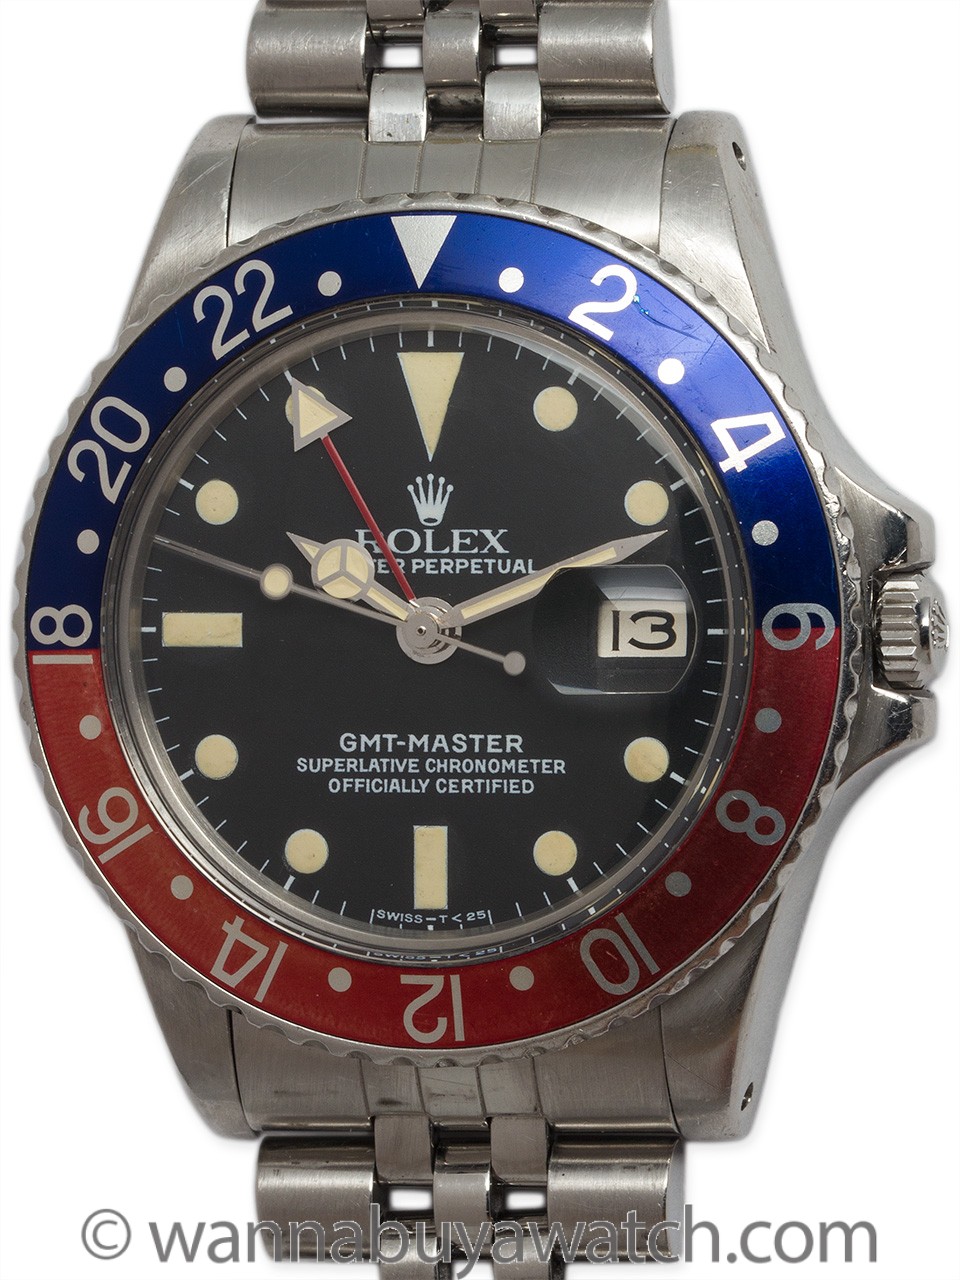 Rolex SS GMT ref 1675 circa 1978 with papers